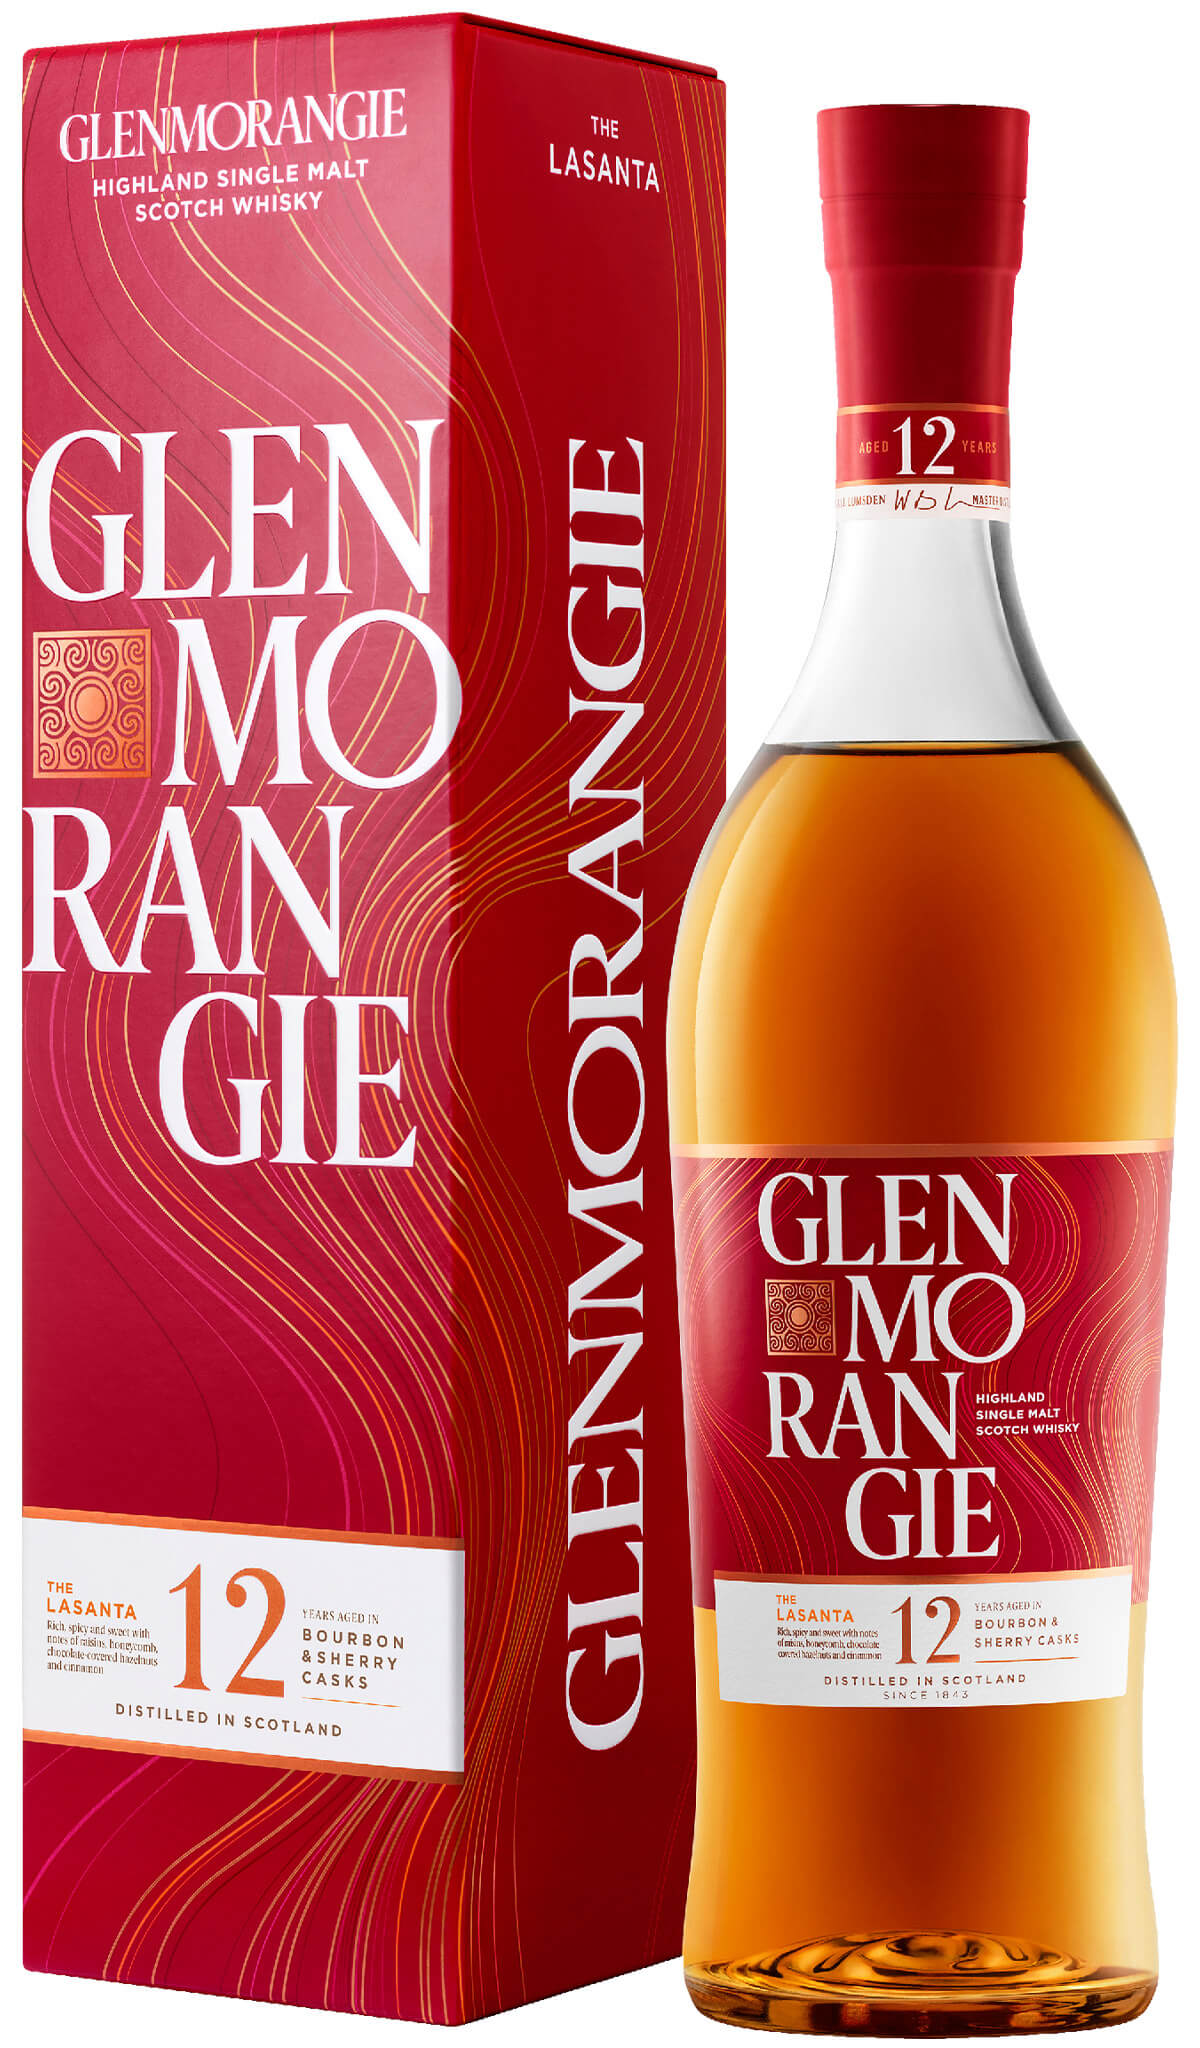 Find out more or buy Glenmorangie 'The Lasanta' 12 Year Old Single Malt Scotch Whisky 700ml online at Wine Sellers Direct - Australia’s independent liquor specialists.